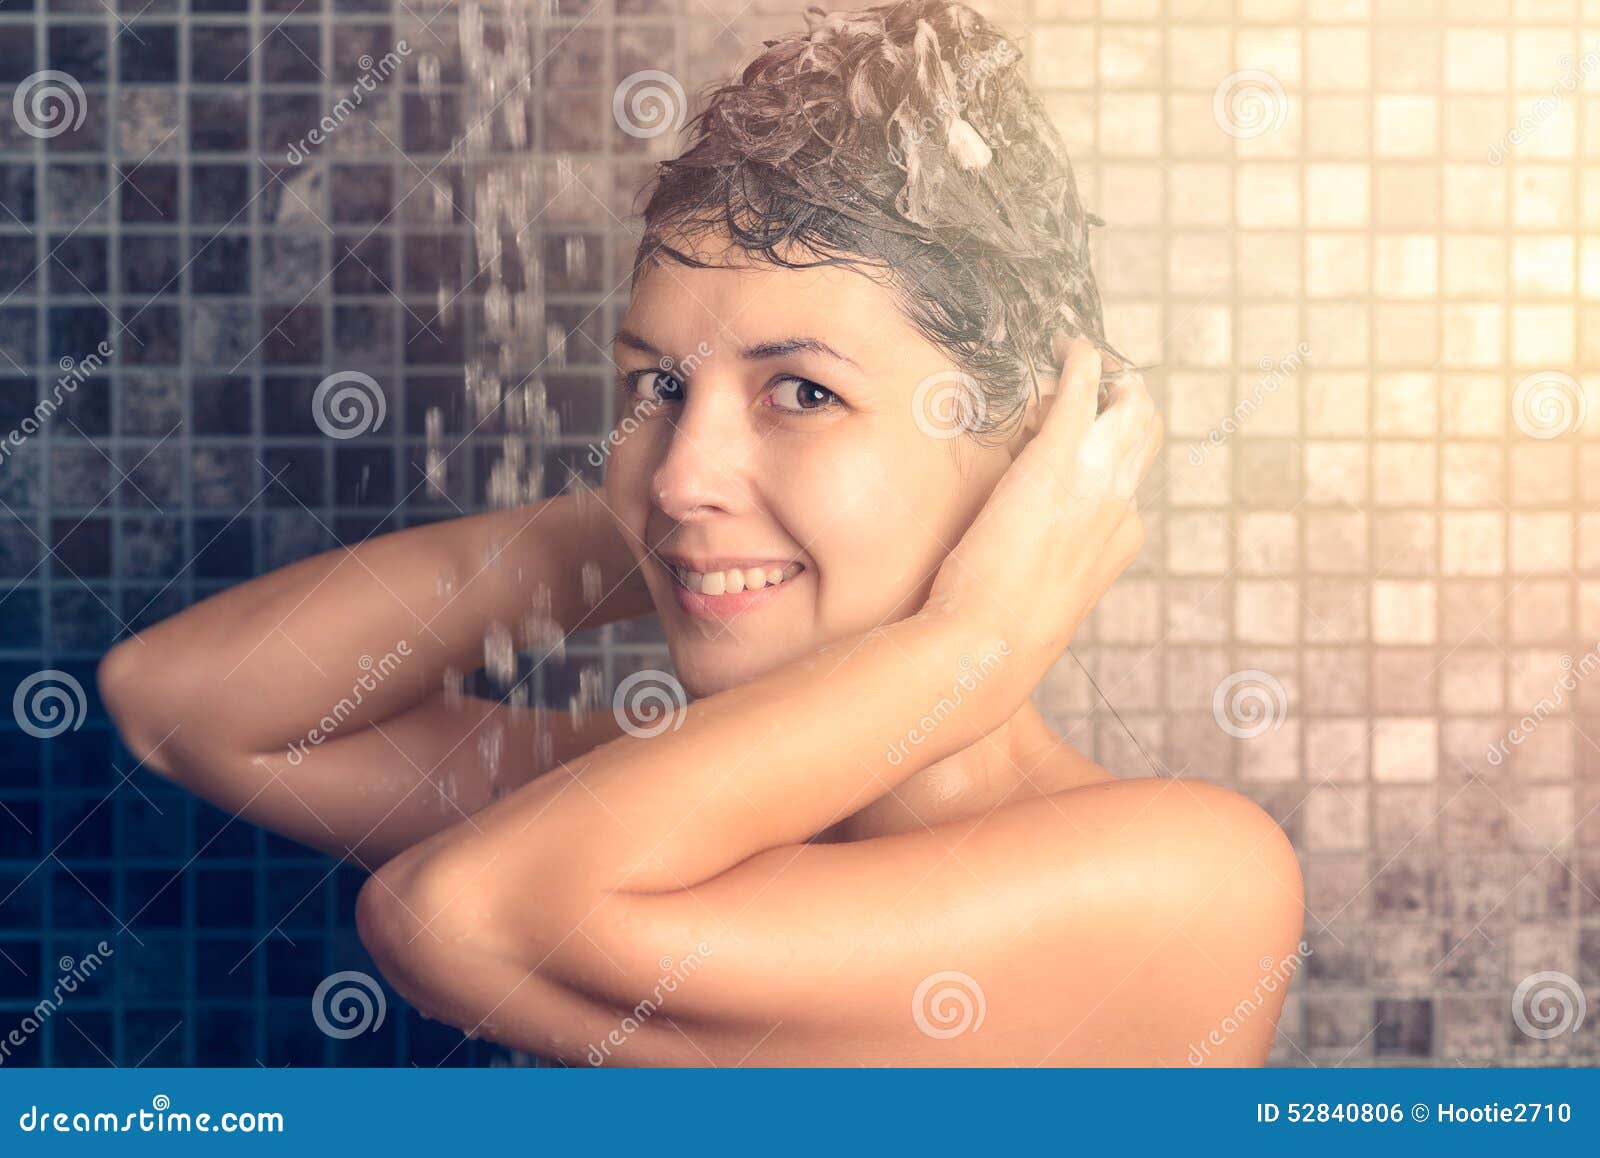 Woman Shampooing Her Long Brown Hair Stock Photo Image 52840806